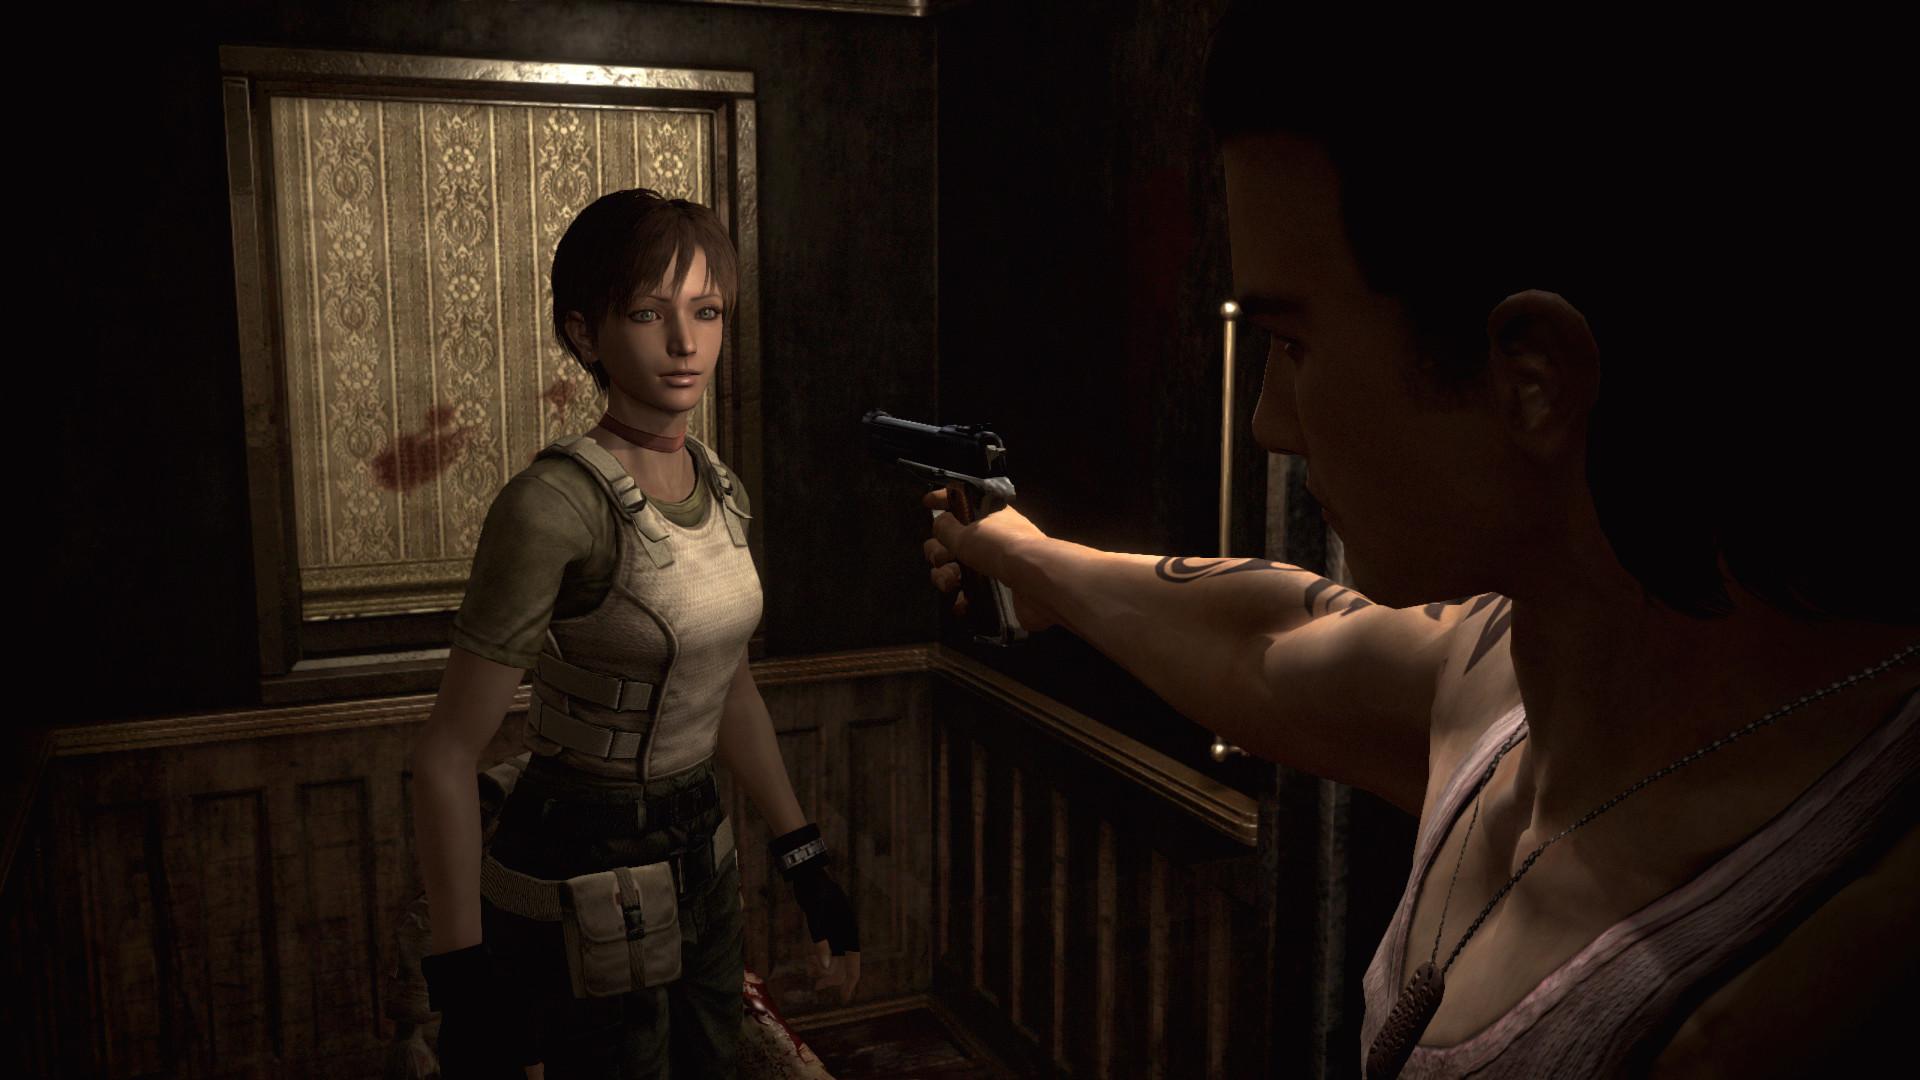 Resident Evil Zero: Here's How To Access And Change Outfits